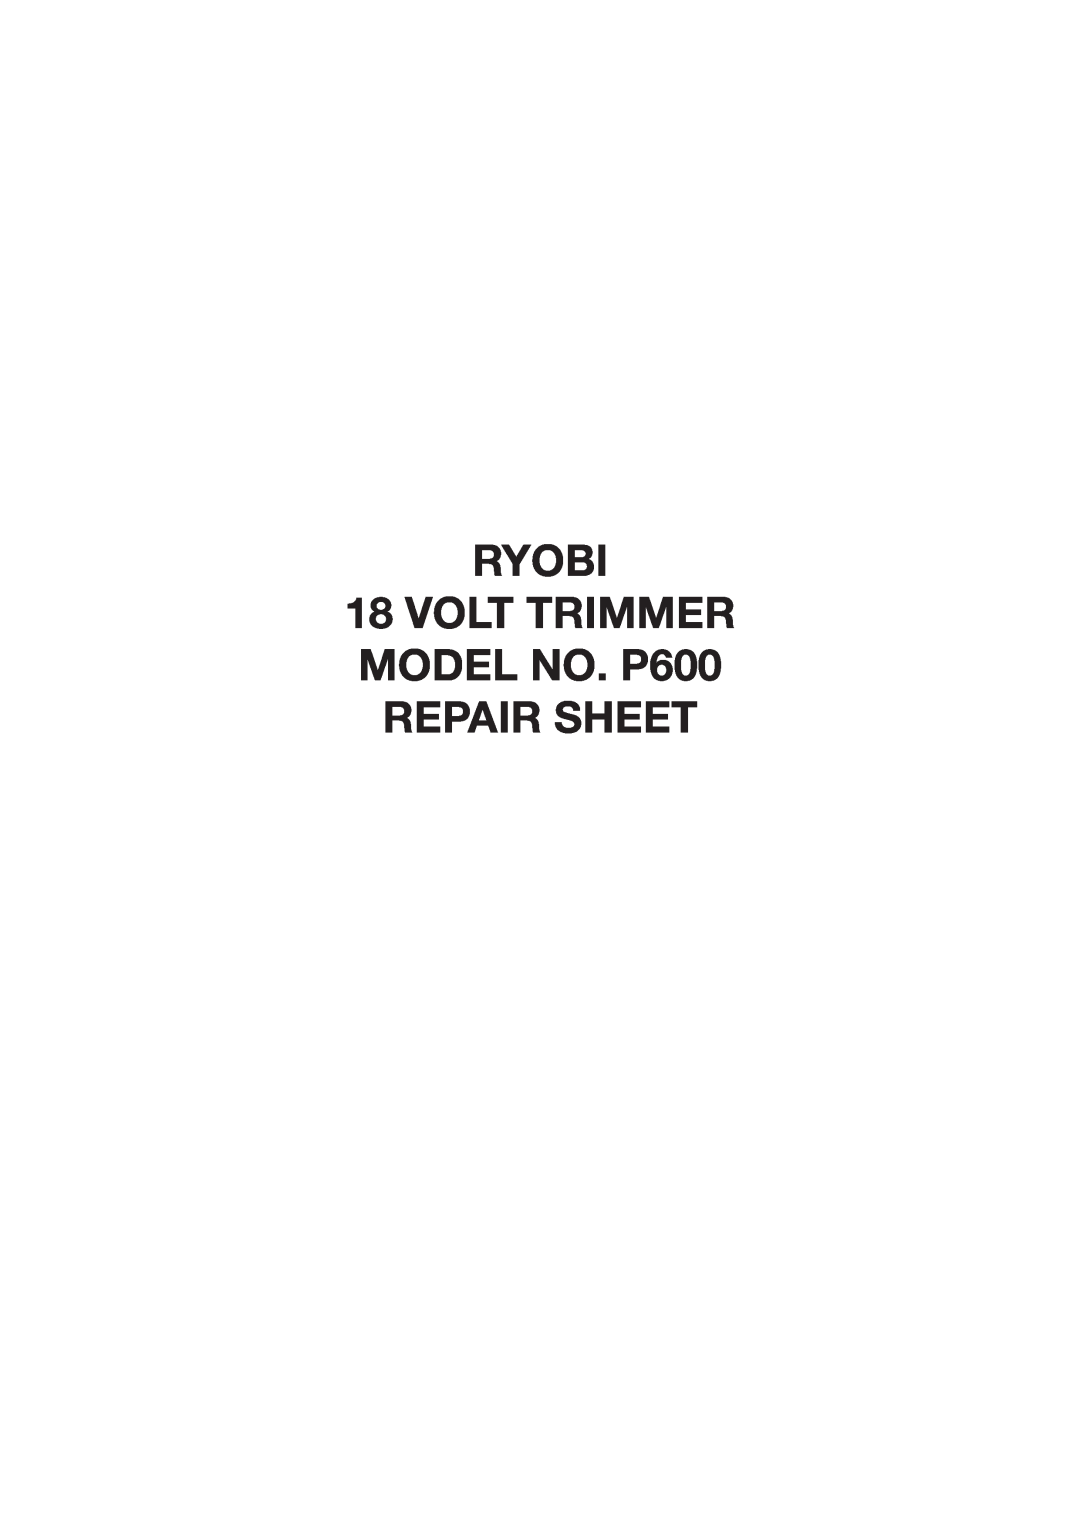 Ryobi P600 manual Operator’S Manual, Volt Trimmer, Save This Manual For Future Reference, Accepts All One+ Battery Packs 